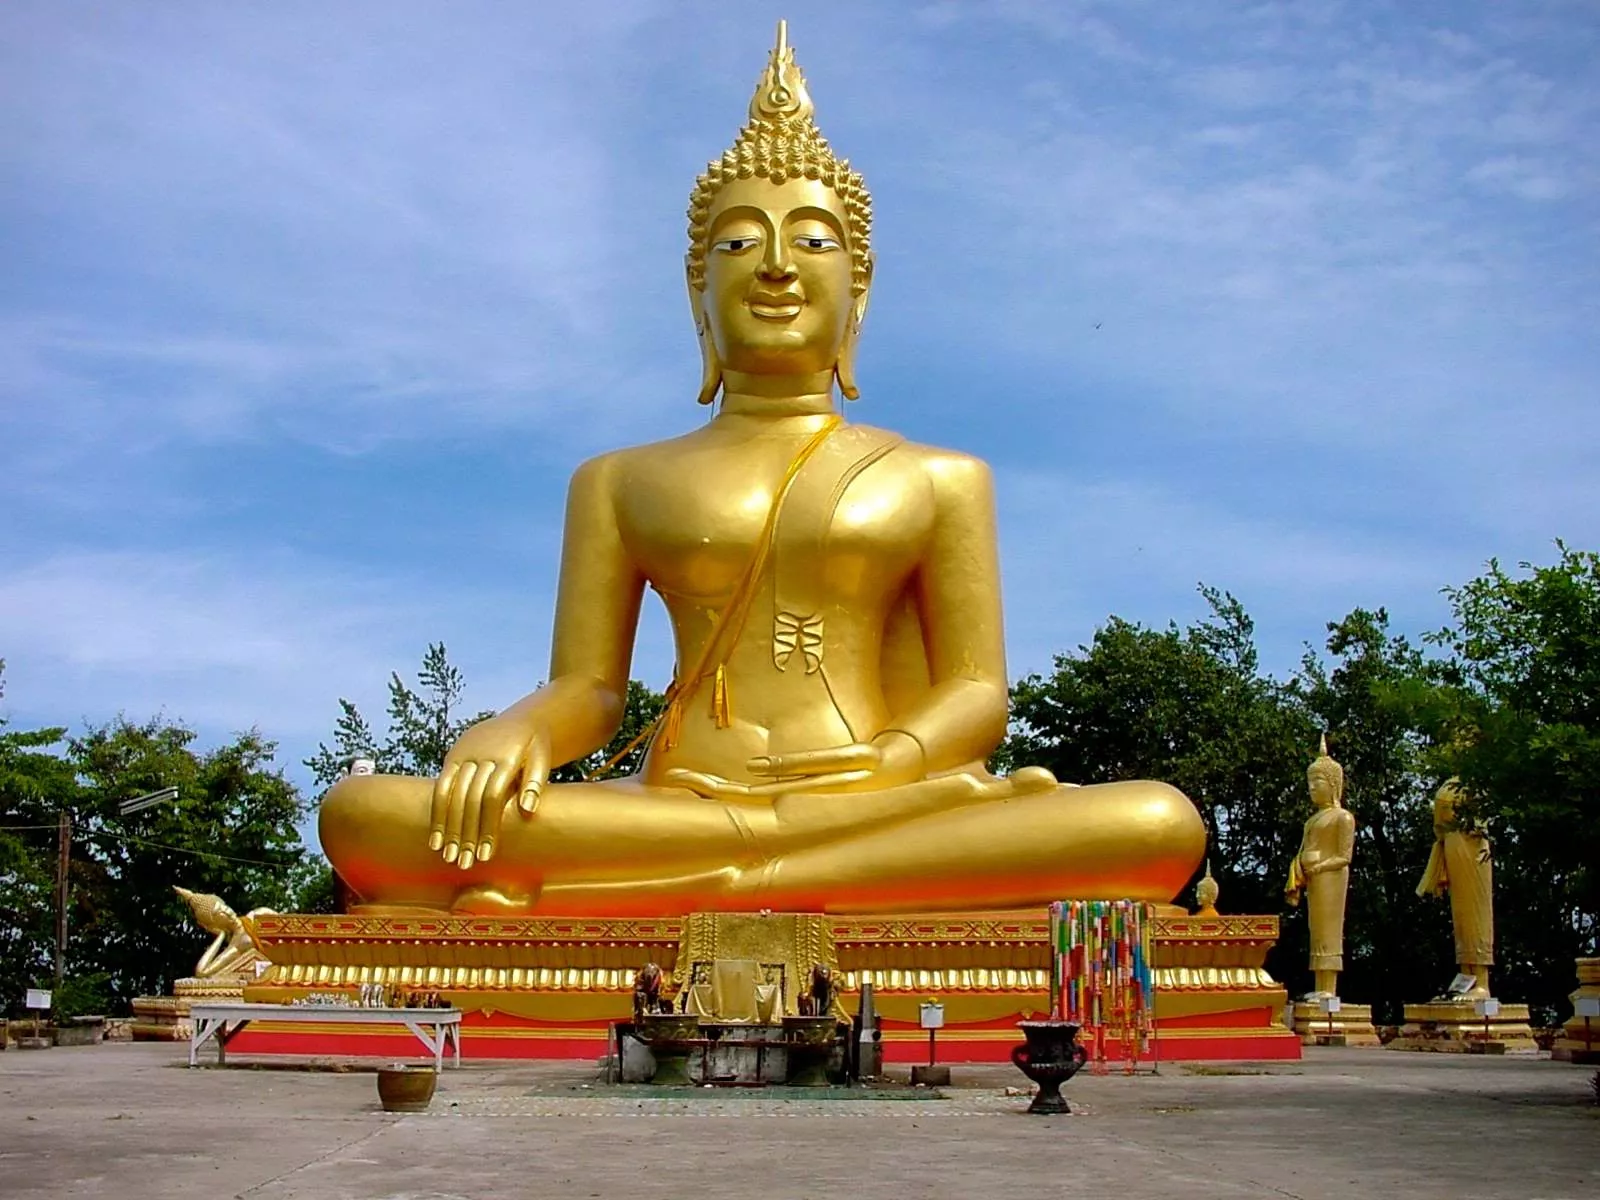 Big Buddha in Thailand, Central Asia | Architecture,Monuments - Rated 4